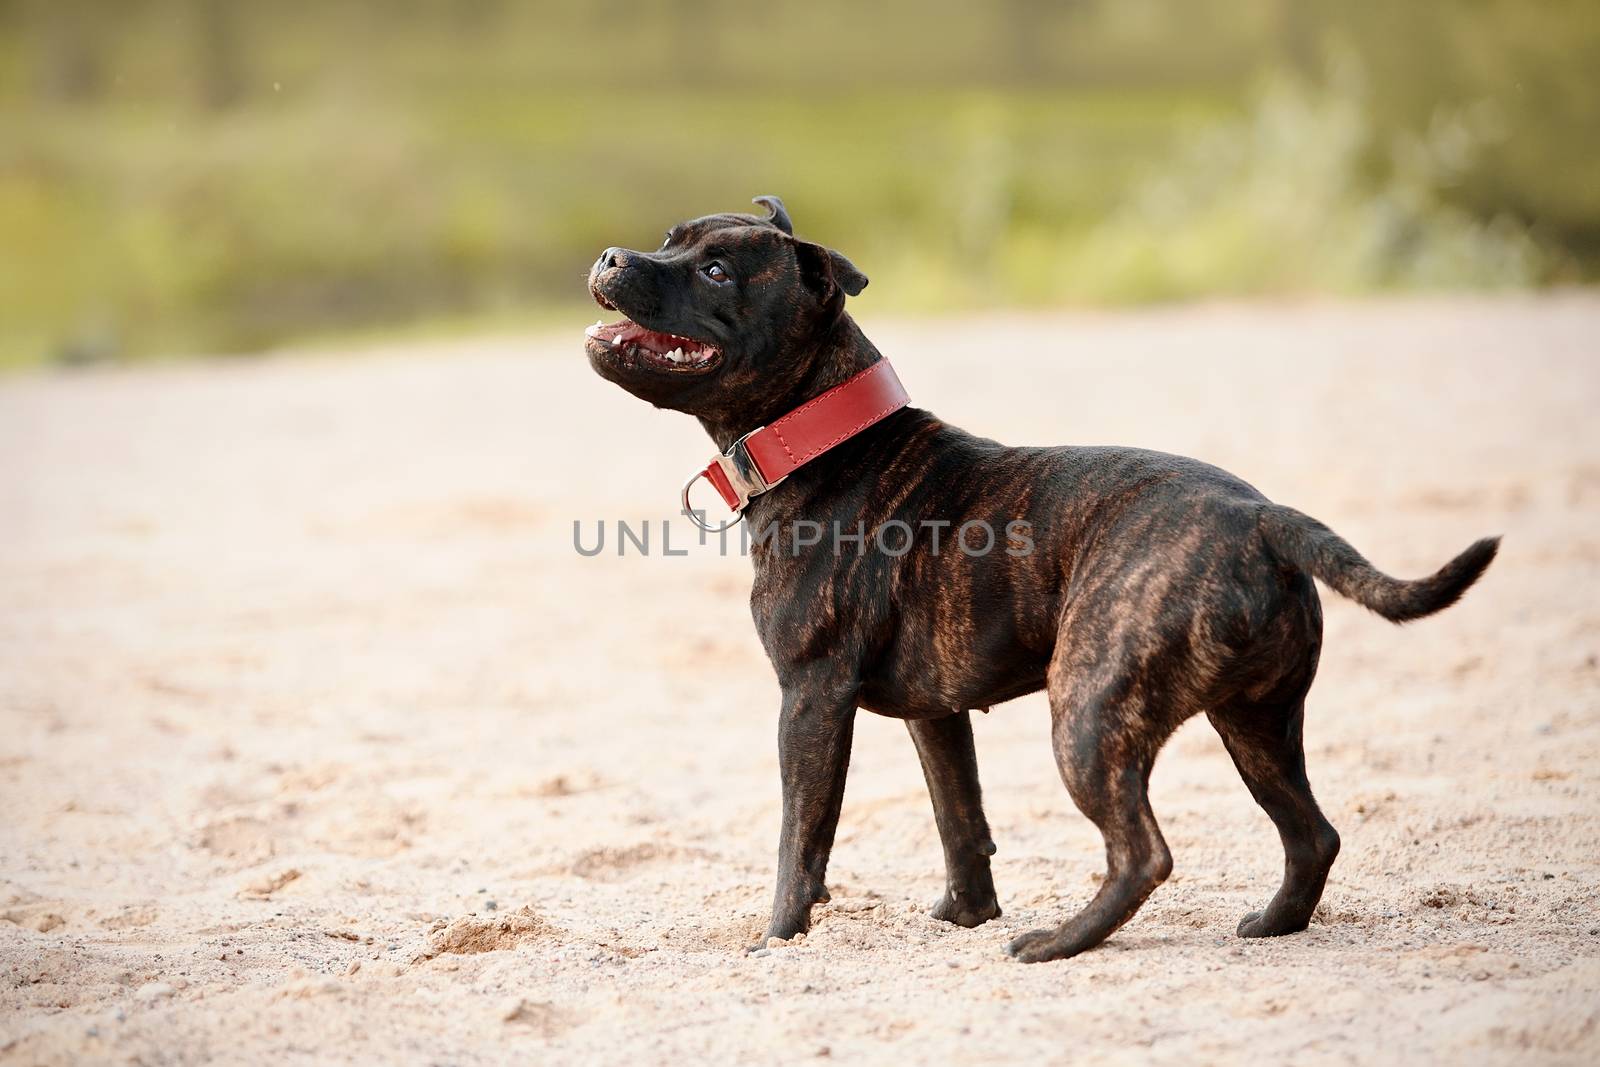 Staffordshire bull terrier. Bull terrier in a red collar. Active dog. Doggie on walk.